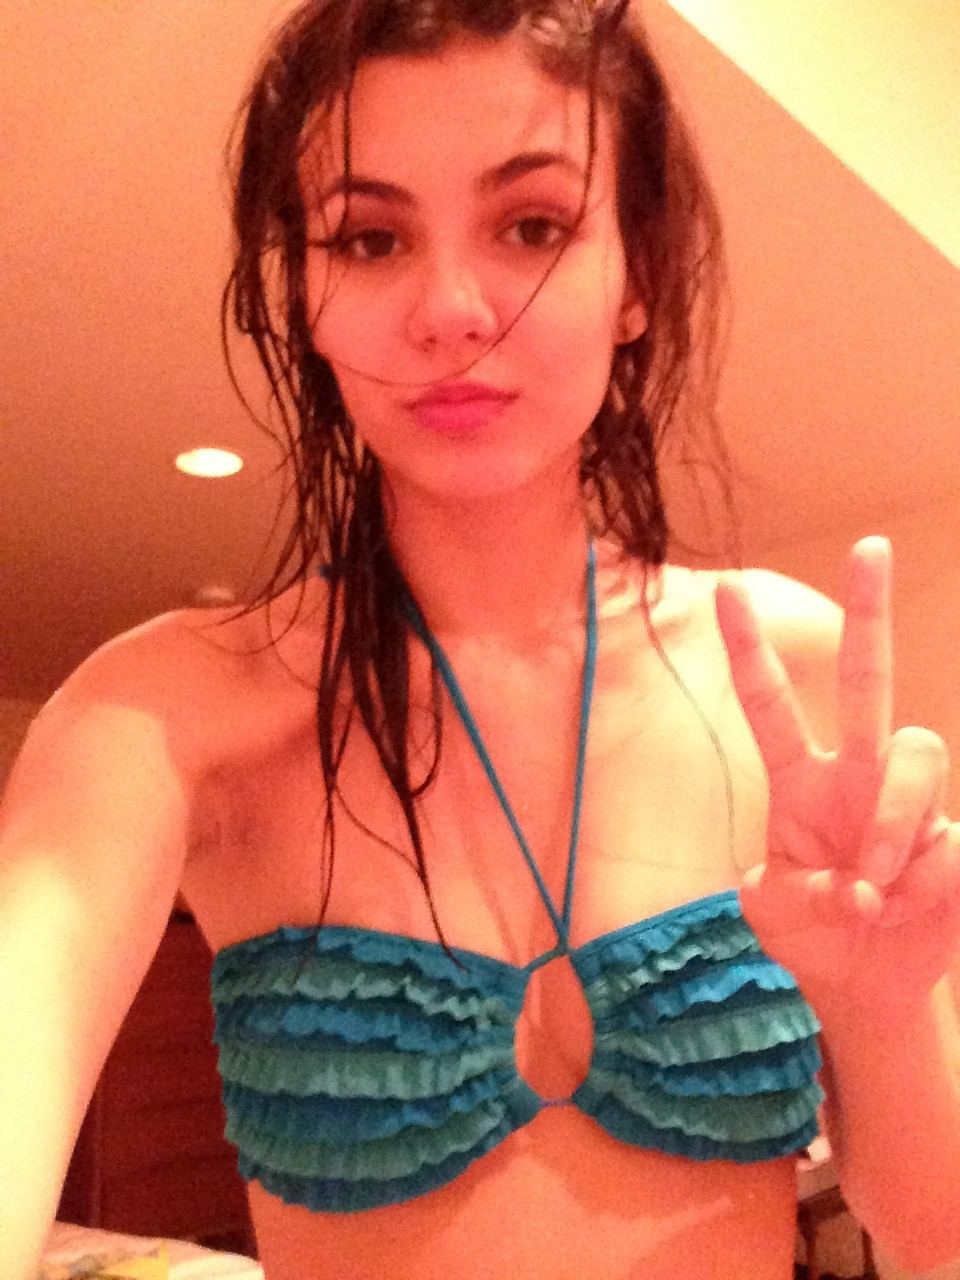 Victoria-Justice-Naked-017b48a1f1a0d046789.jpg